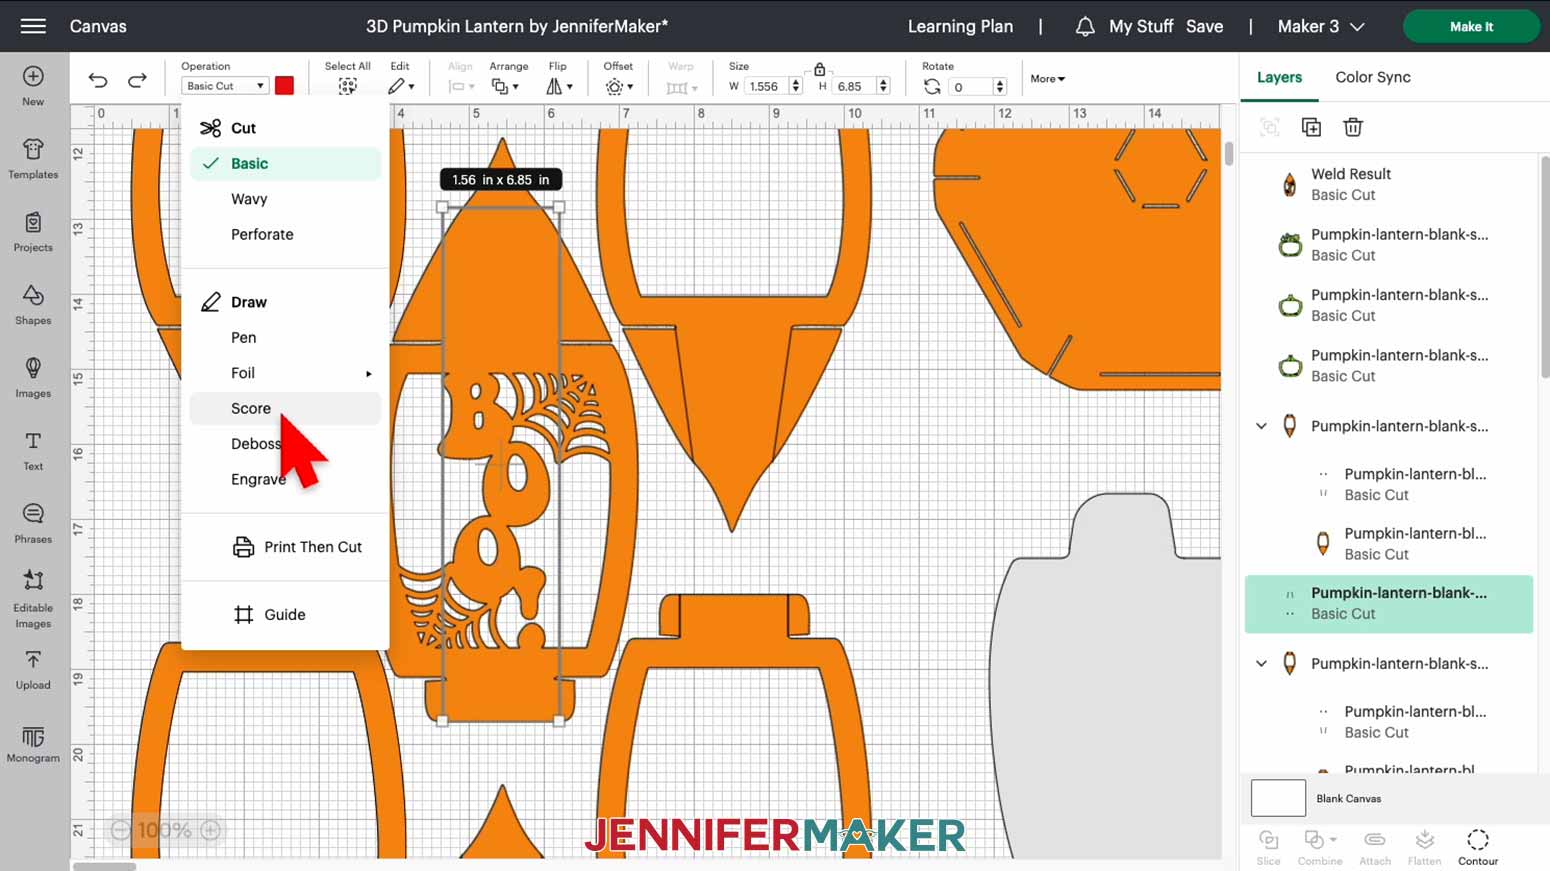 Under the Operation menu in Design Space, select "Score" to convert the score layer for the 3D pumpkin lantern panel